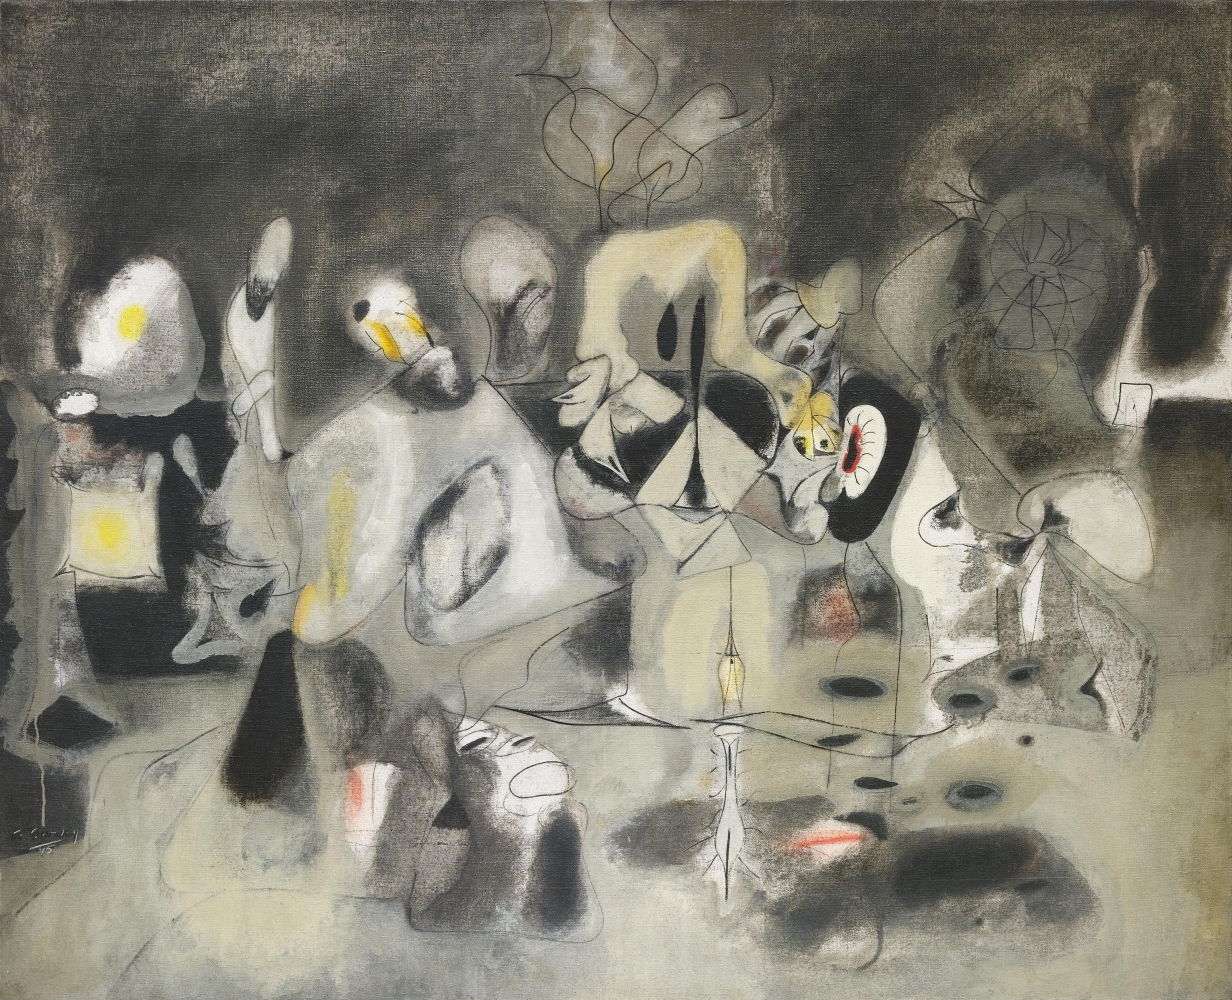 Diary of a Seducer, 1945, oil on canvas, 50 x 62 in. (127 x 157.5 cm). The Museum of Modern Art, New York. Gift of Mr. and Mrs. William A. M. Burden, 340.1985. Digital Image &copy; The Museum of Modern Art/Licensed by SCALA / Art Resource, NY.&nbsp;[AGCR: P300]